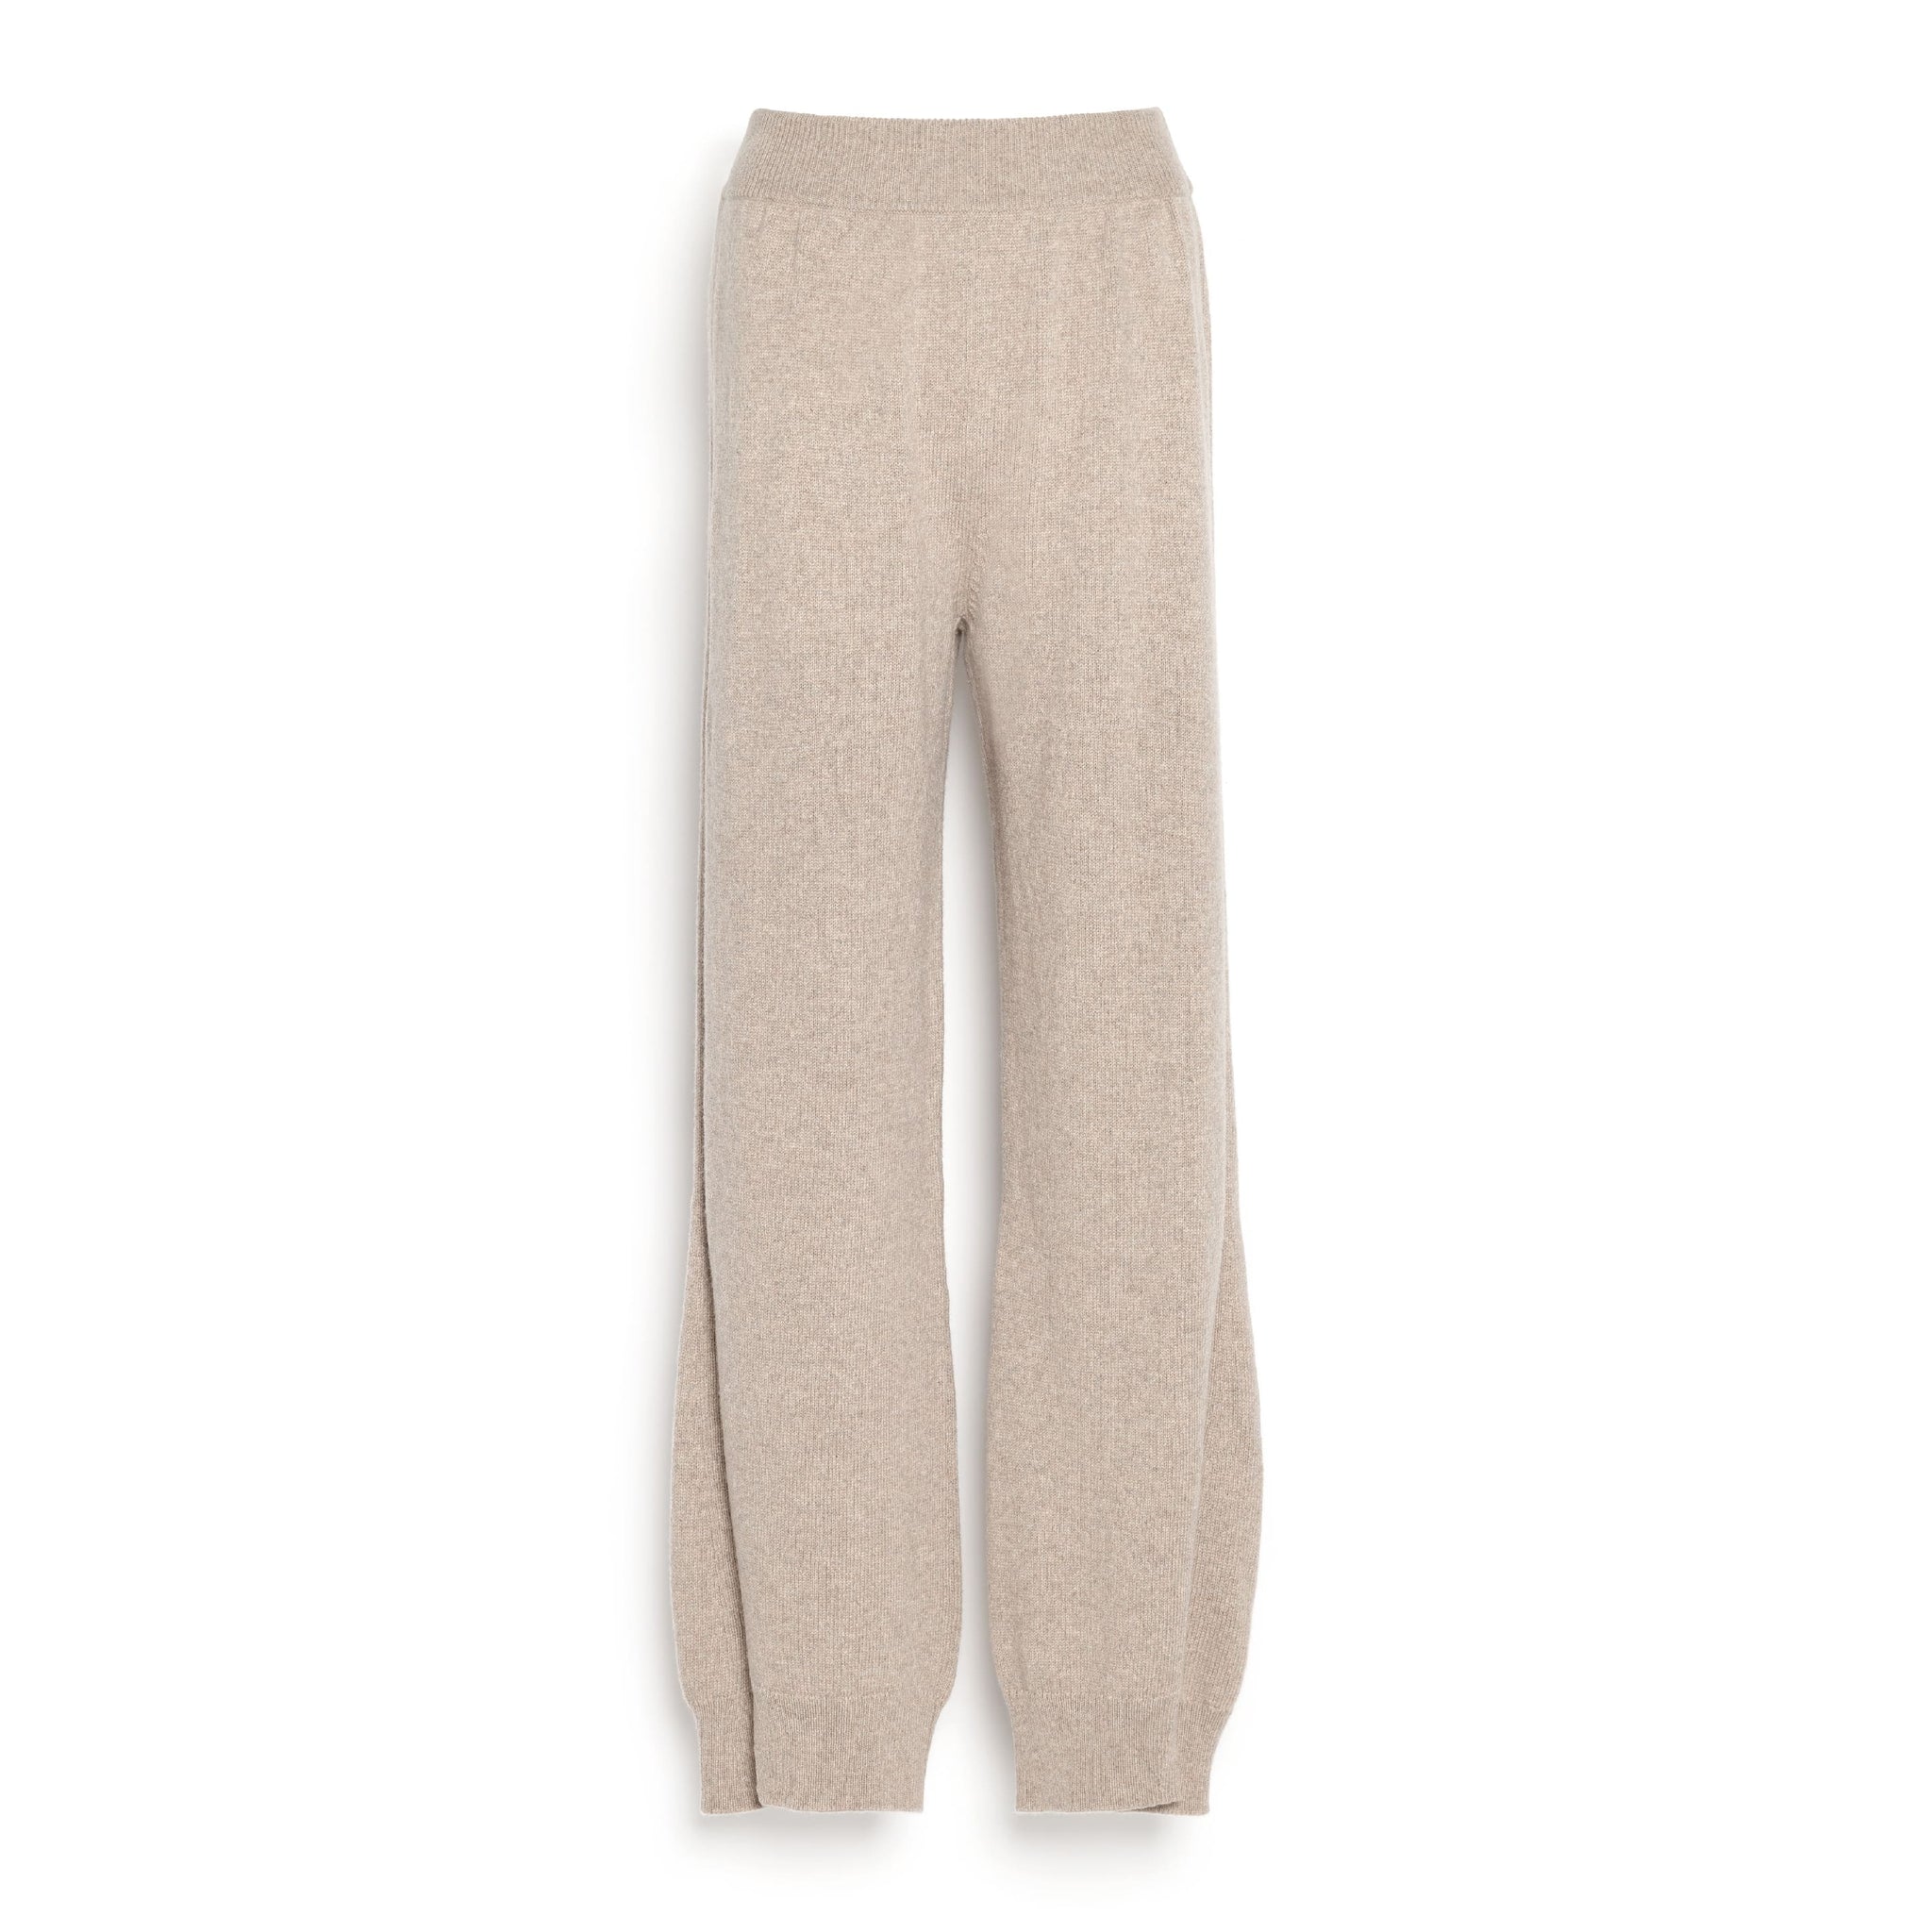 Iconic cashmere trousers –